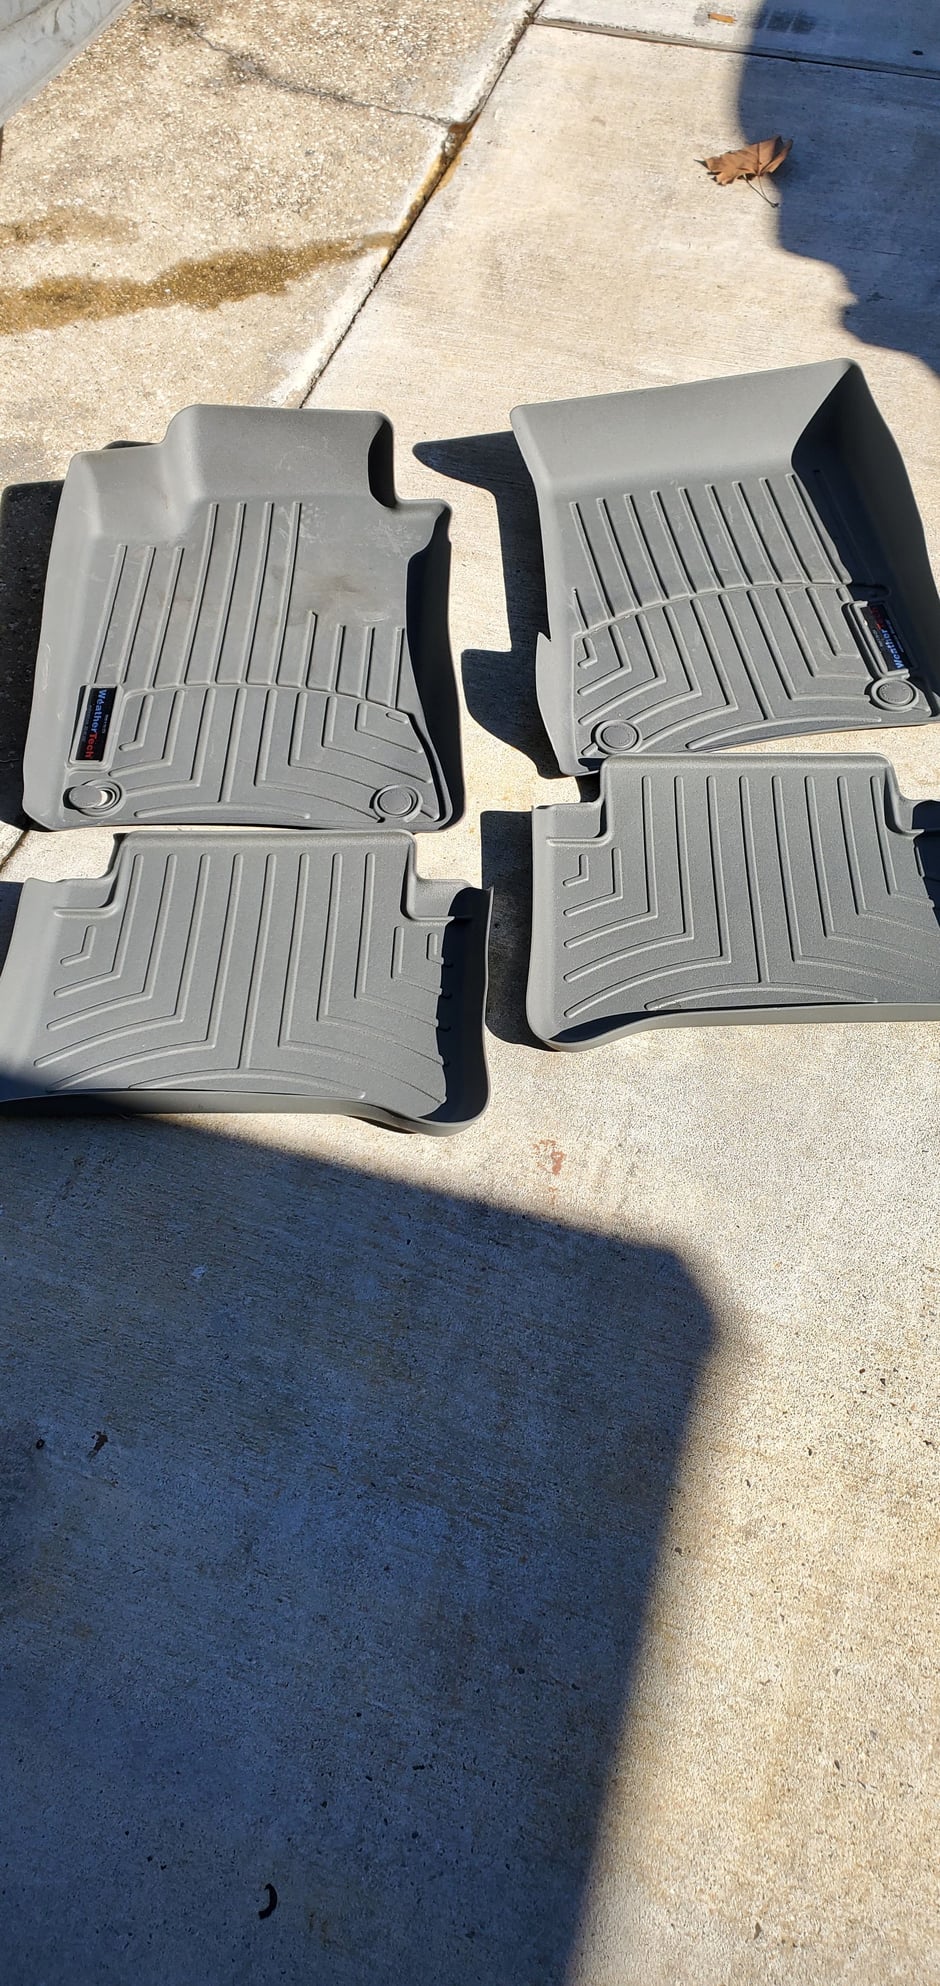 Accessories - Gray weathertech floormats $175 shipped - Used - 2003 to 2006 Mercedes-Benz E-Class - New Orleans, LA 70128, United States